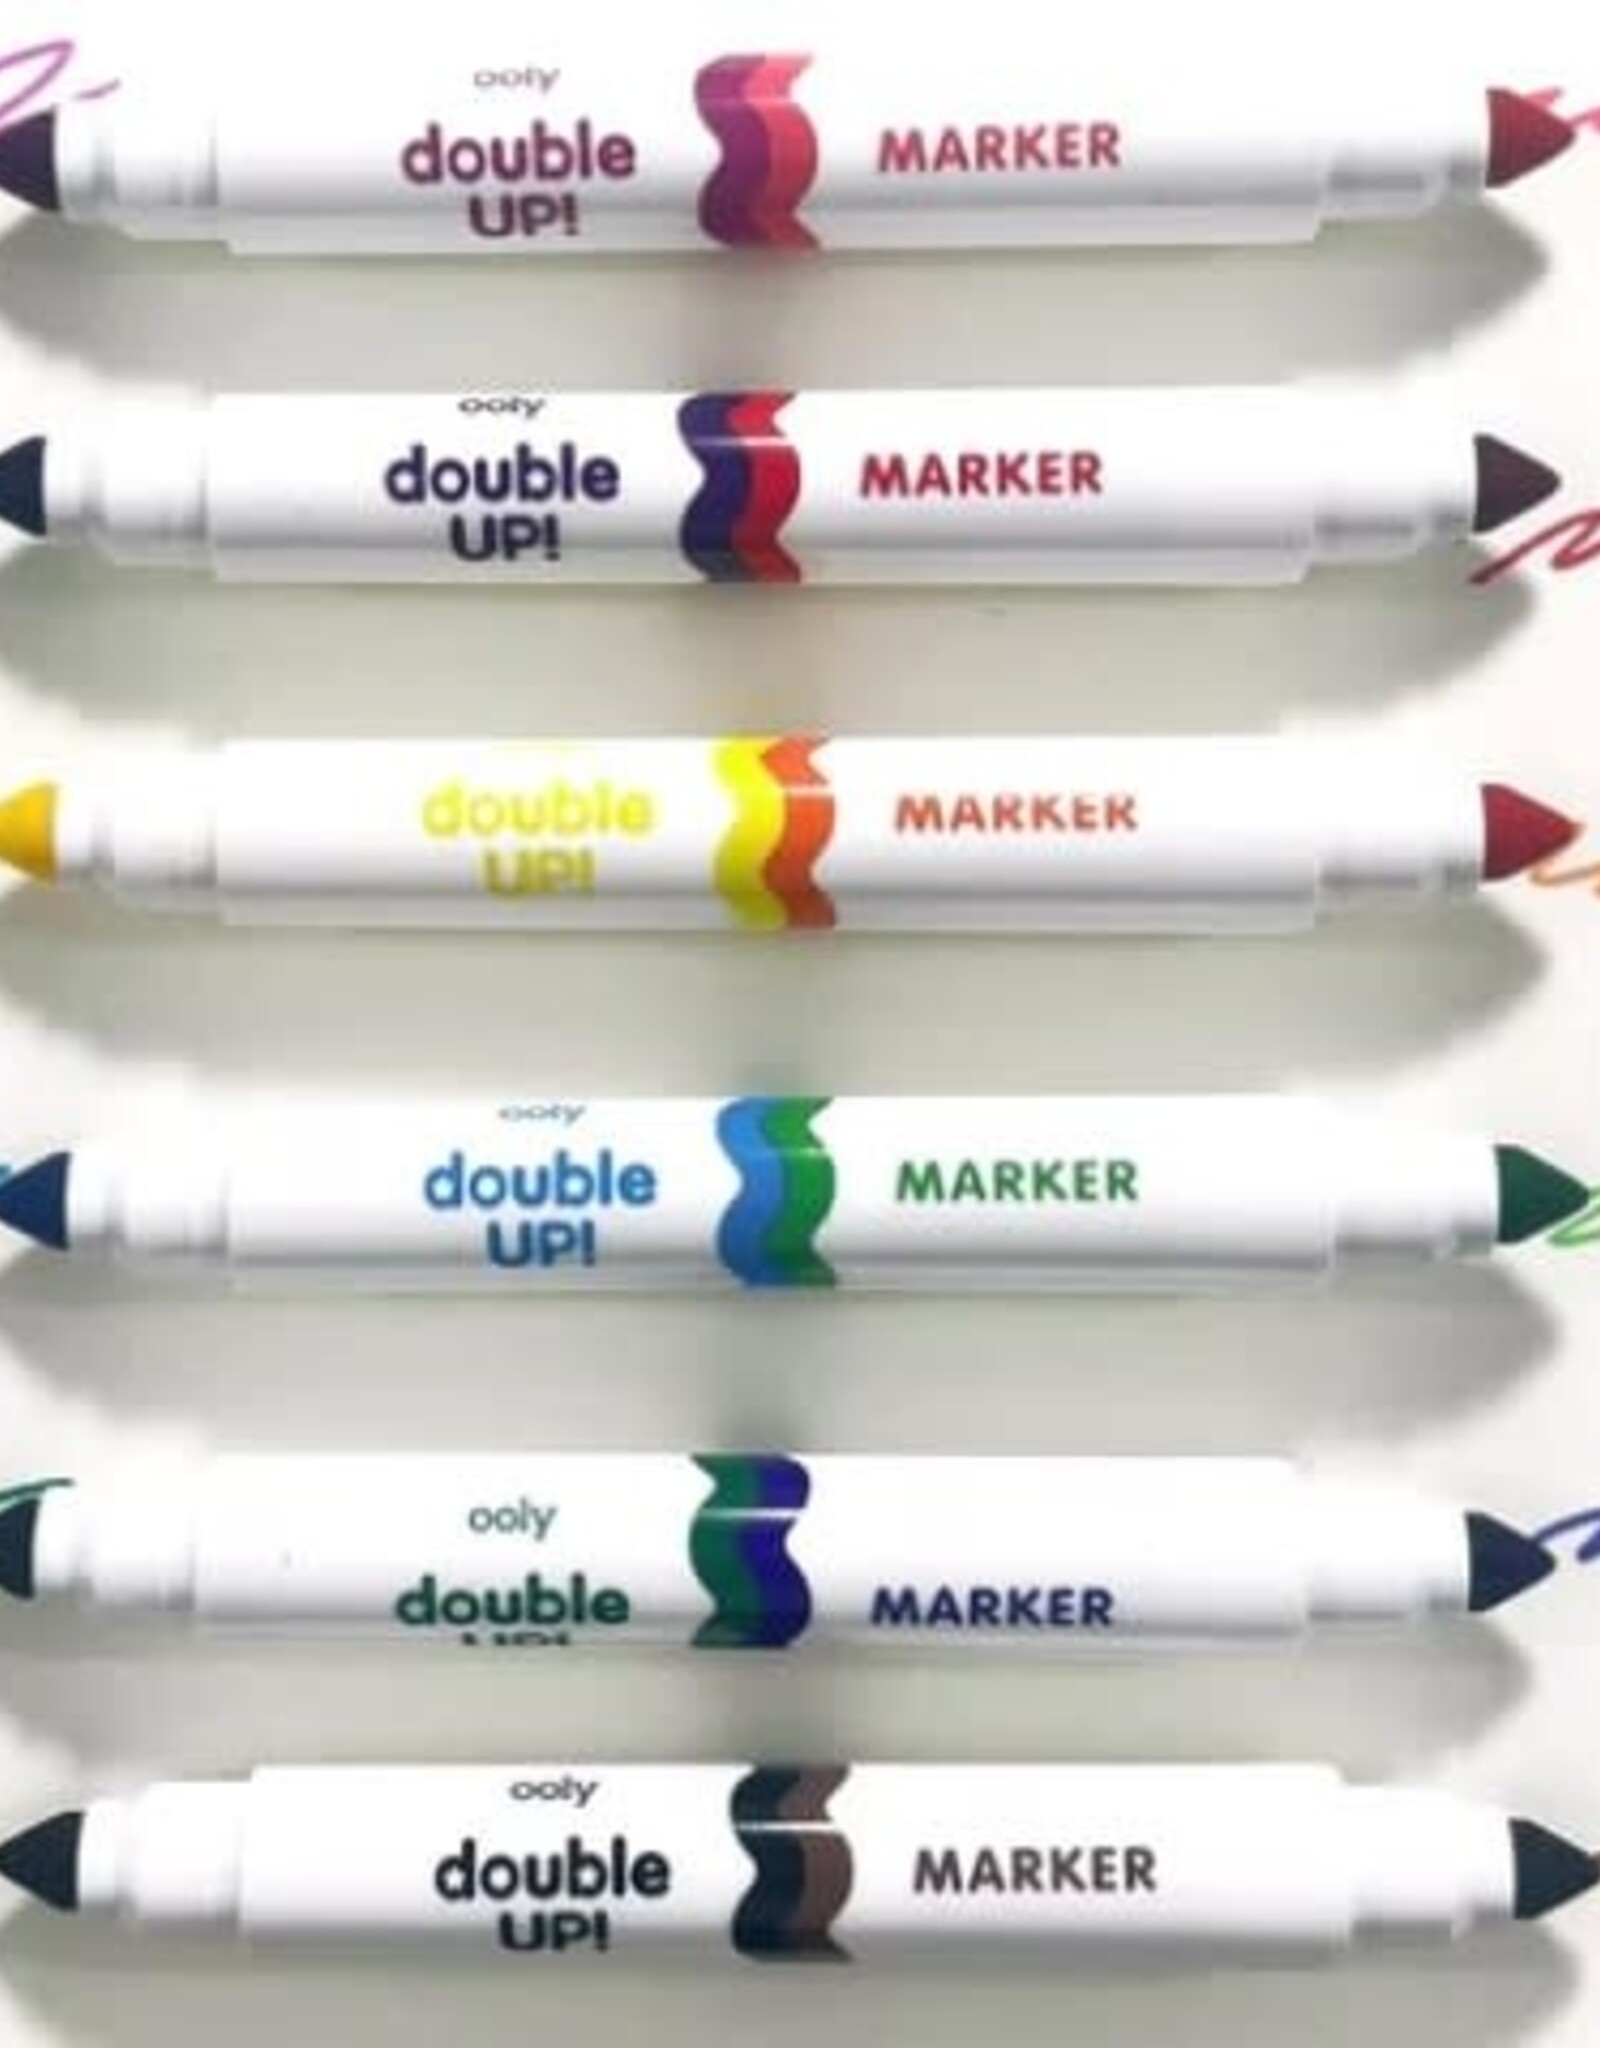 OOLY DOUBLE UP! DOUBLE-ENDED MARKERS